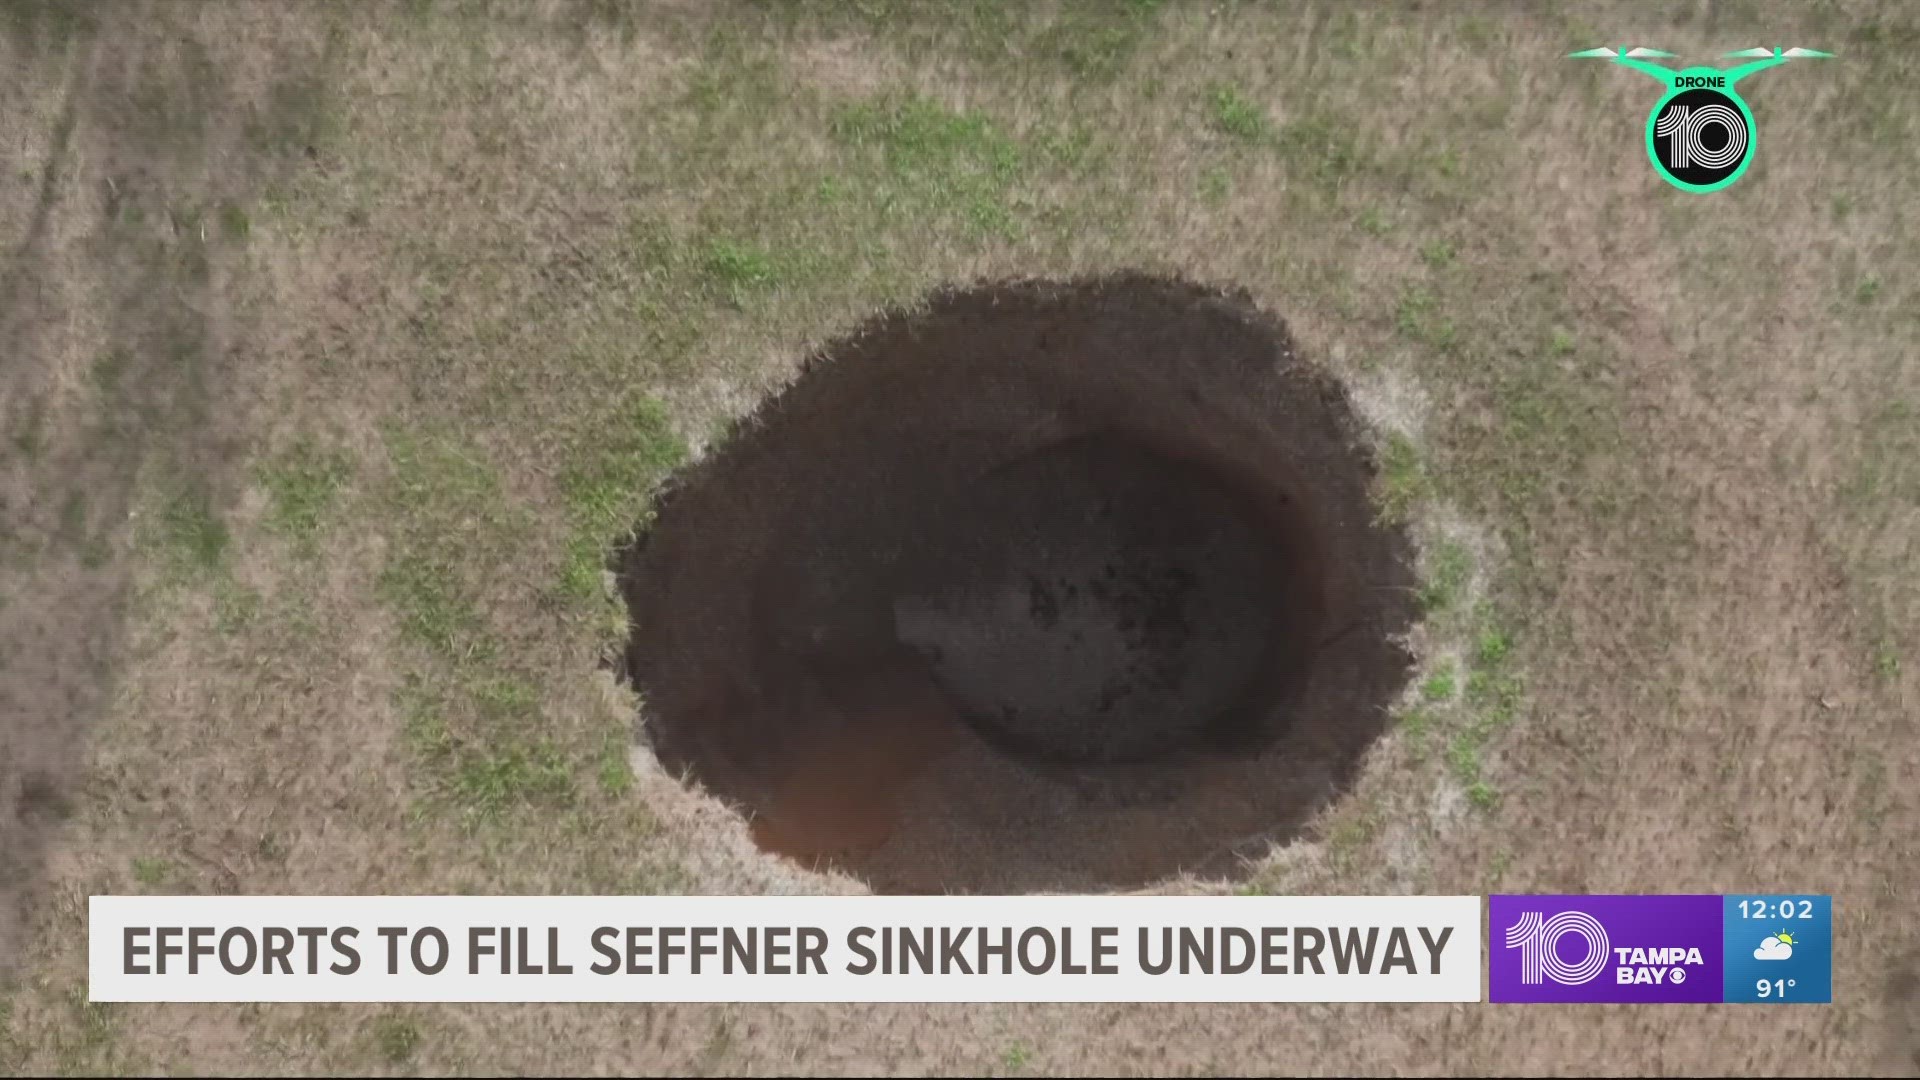 County workers are filling the sinkhole with gravel and trying to prevent other sinkholes from opening in the area.